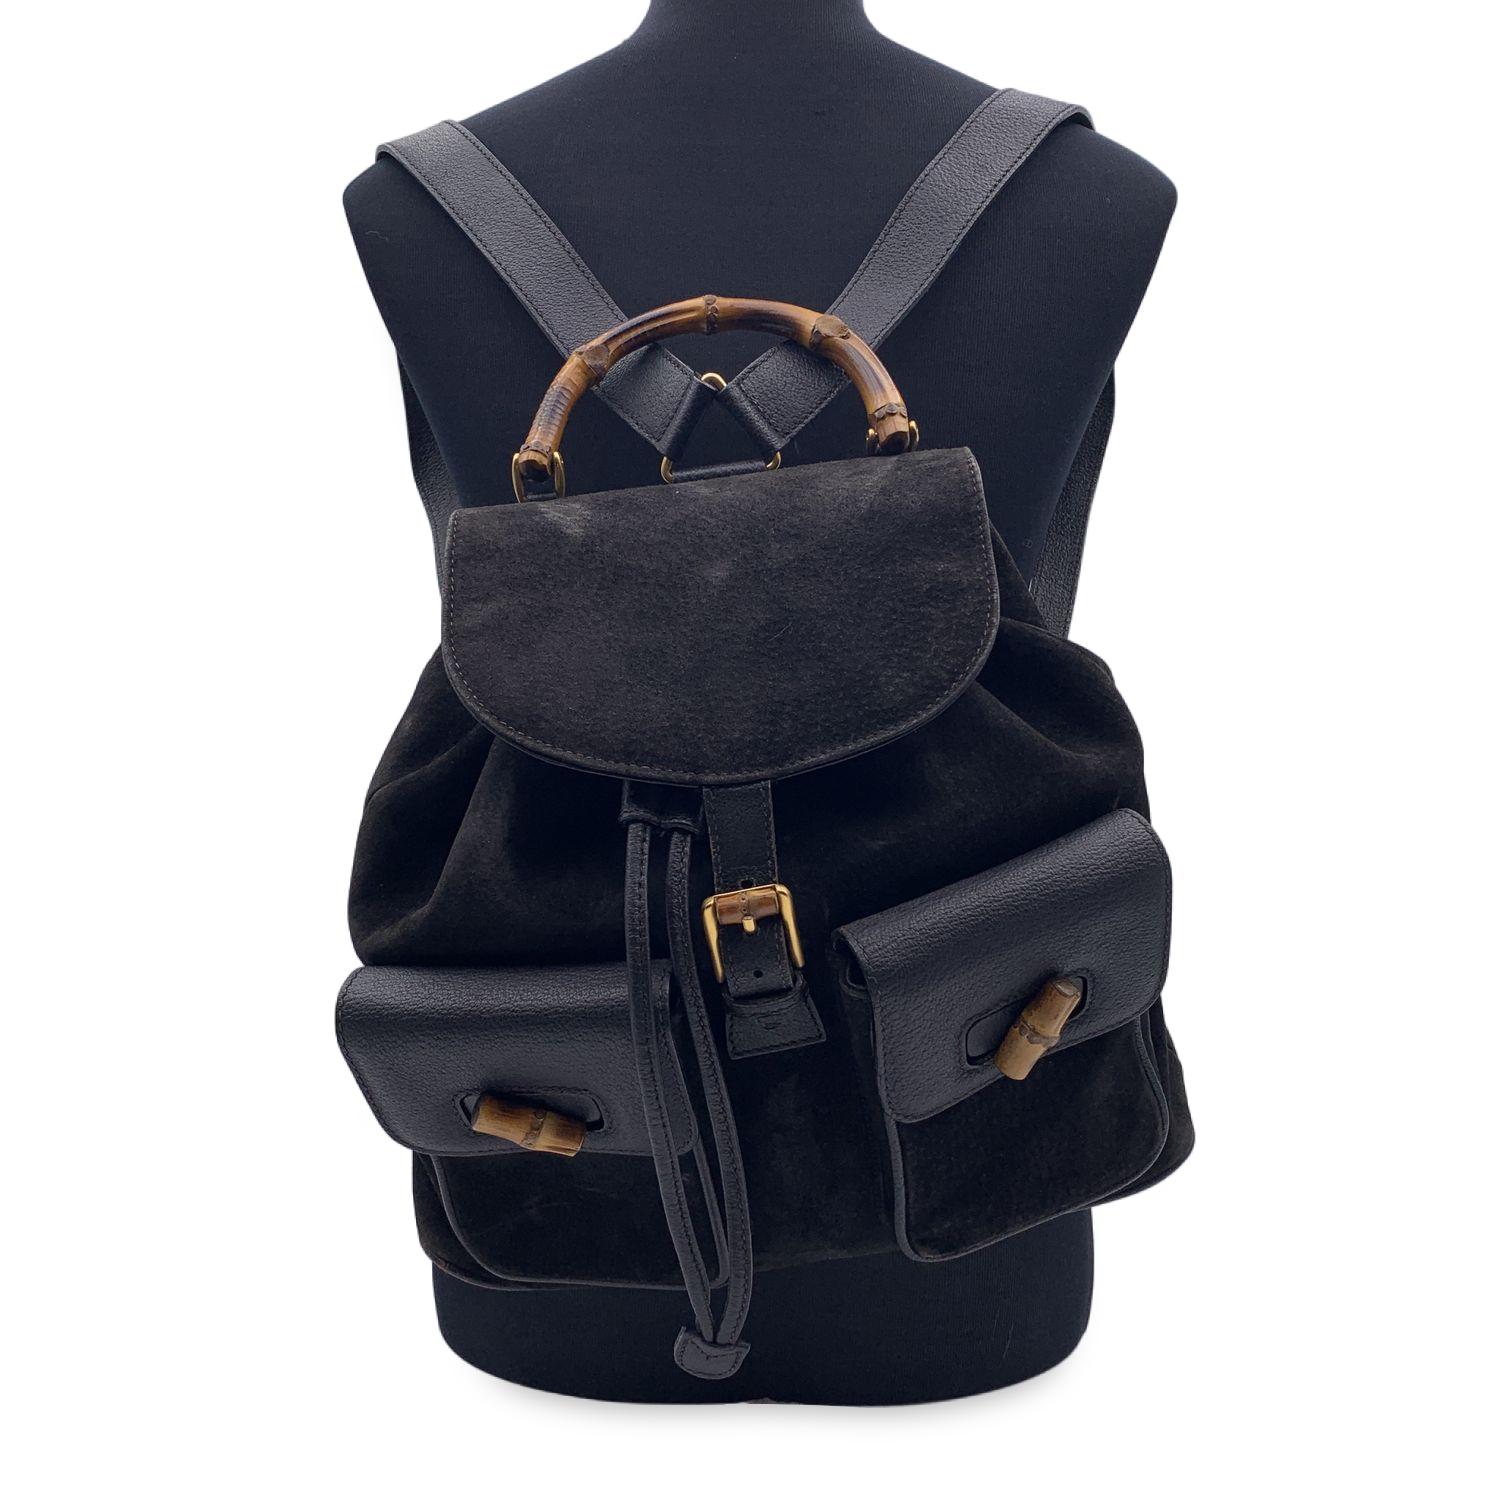 Vintage backpack by Gucci, crafted in black suede and leather. It features Bamboo handle and and knobs. Flap with buckle closure and drawstring top opening. Internal black diamond lining. 1 side zipper pocket inside. Adjustable backstraps. 'GUCCI -